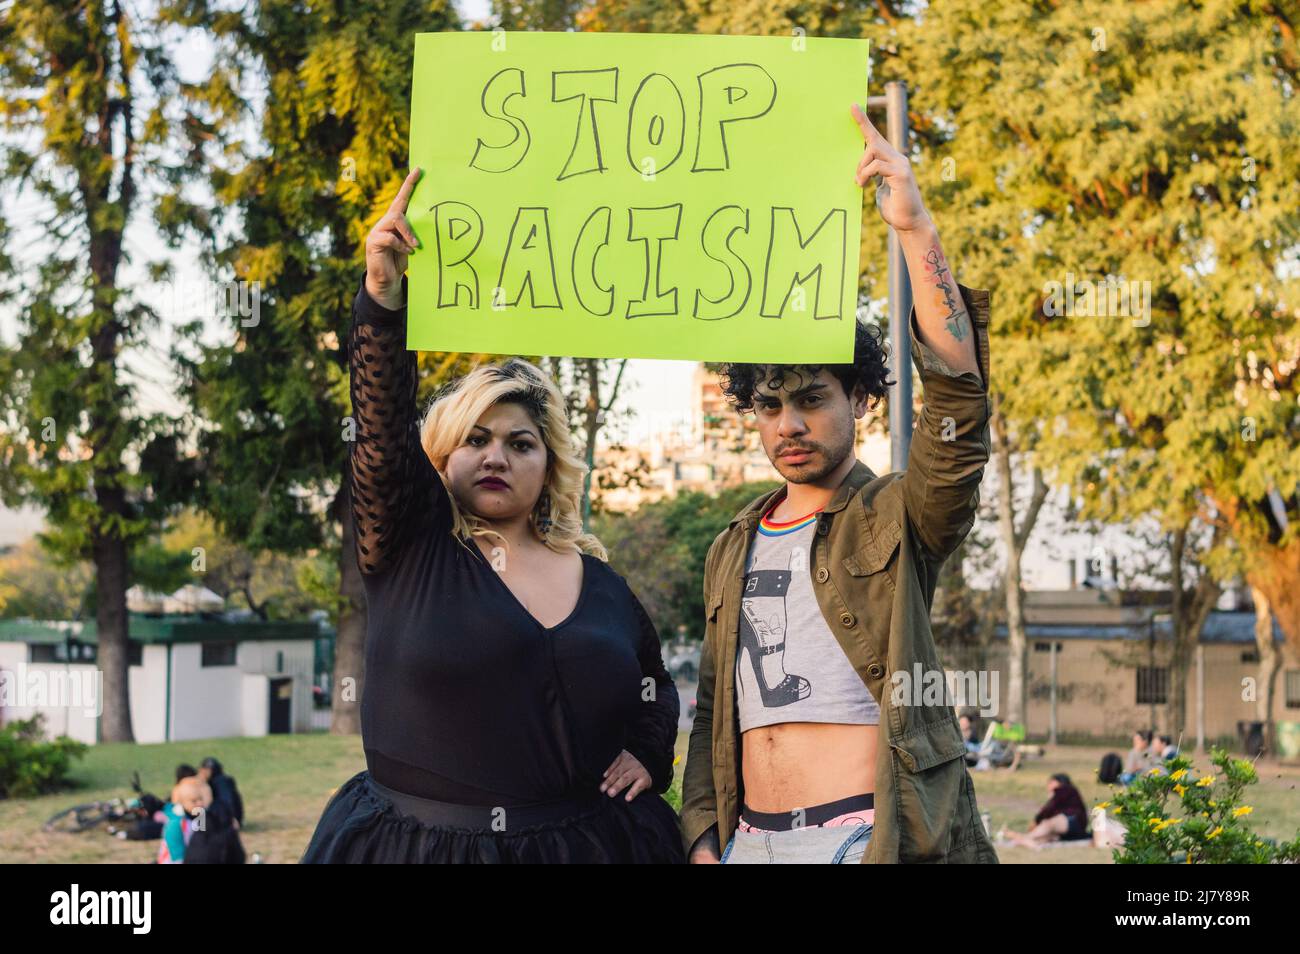 young plus size woman and homosexual man, outdoors in a public park, protesting holding a sign that says 'stop racism' Stock Photo